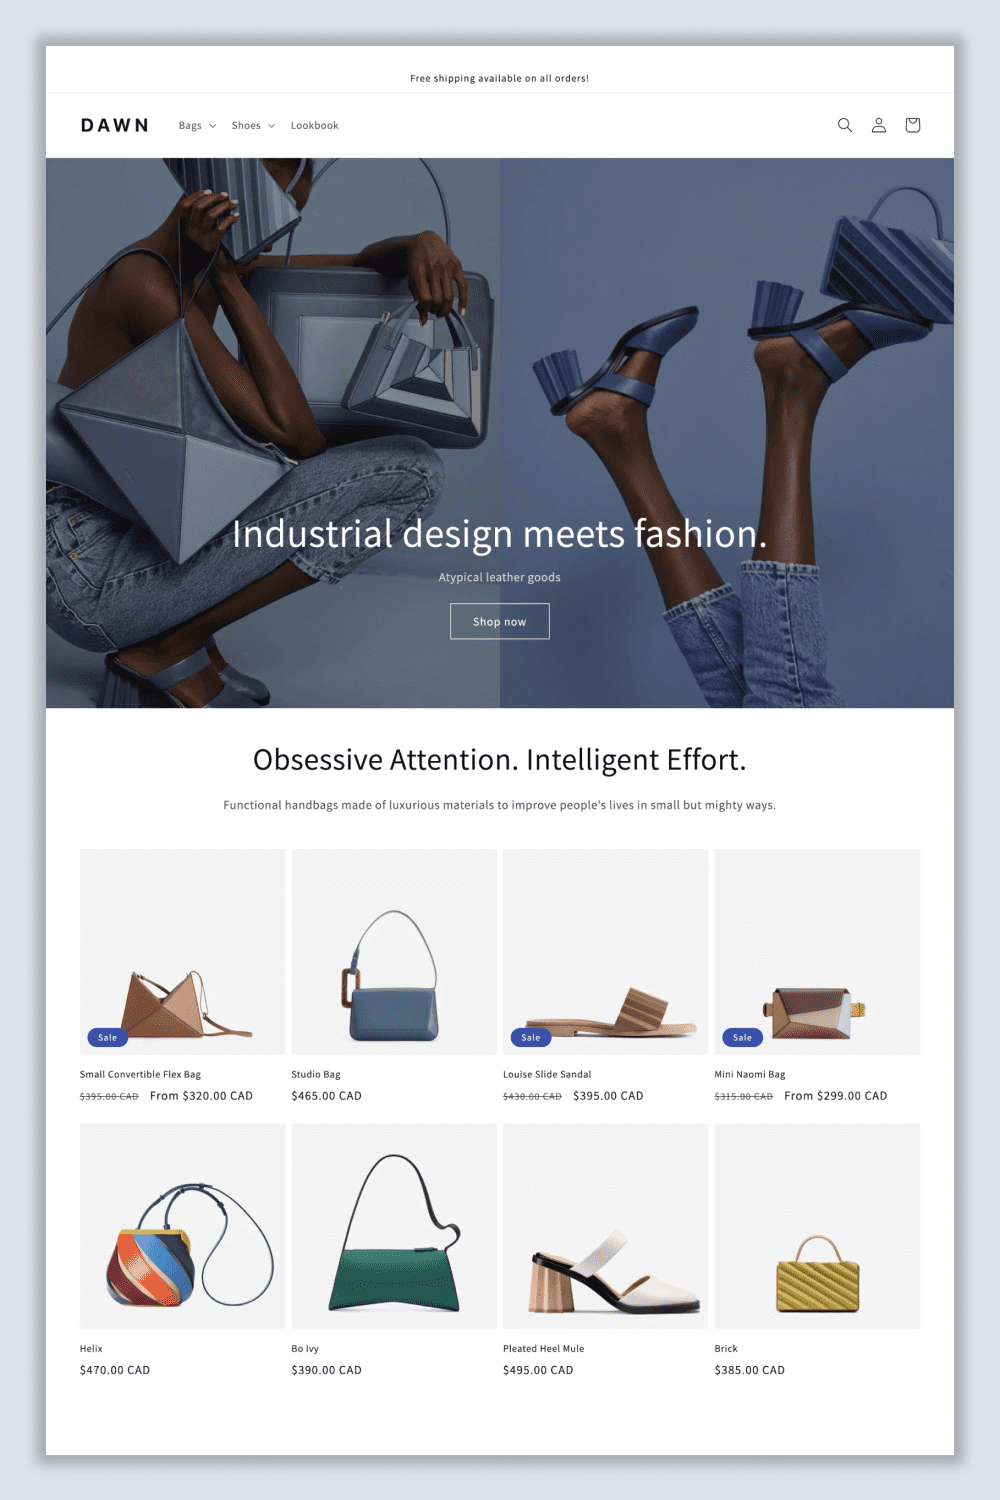 creenshot of the main page of the online store with photos of bags and shoes.